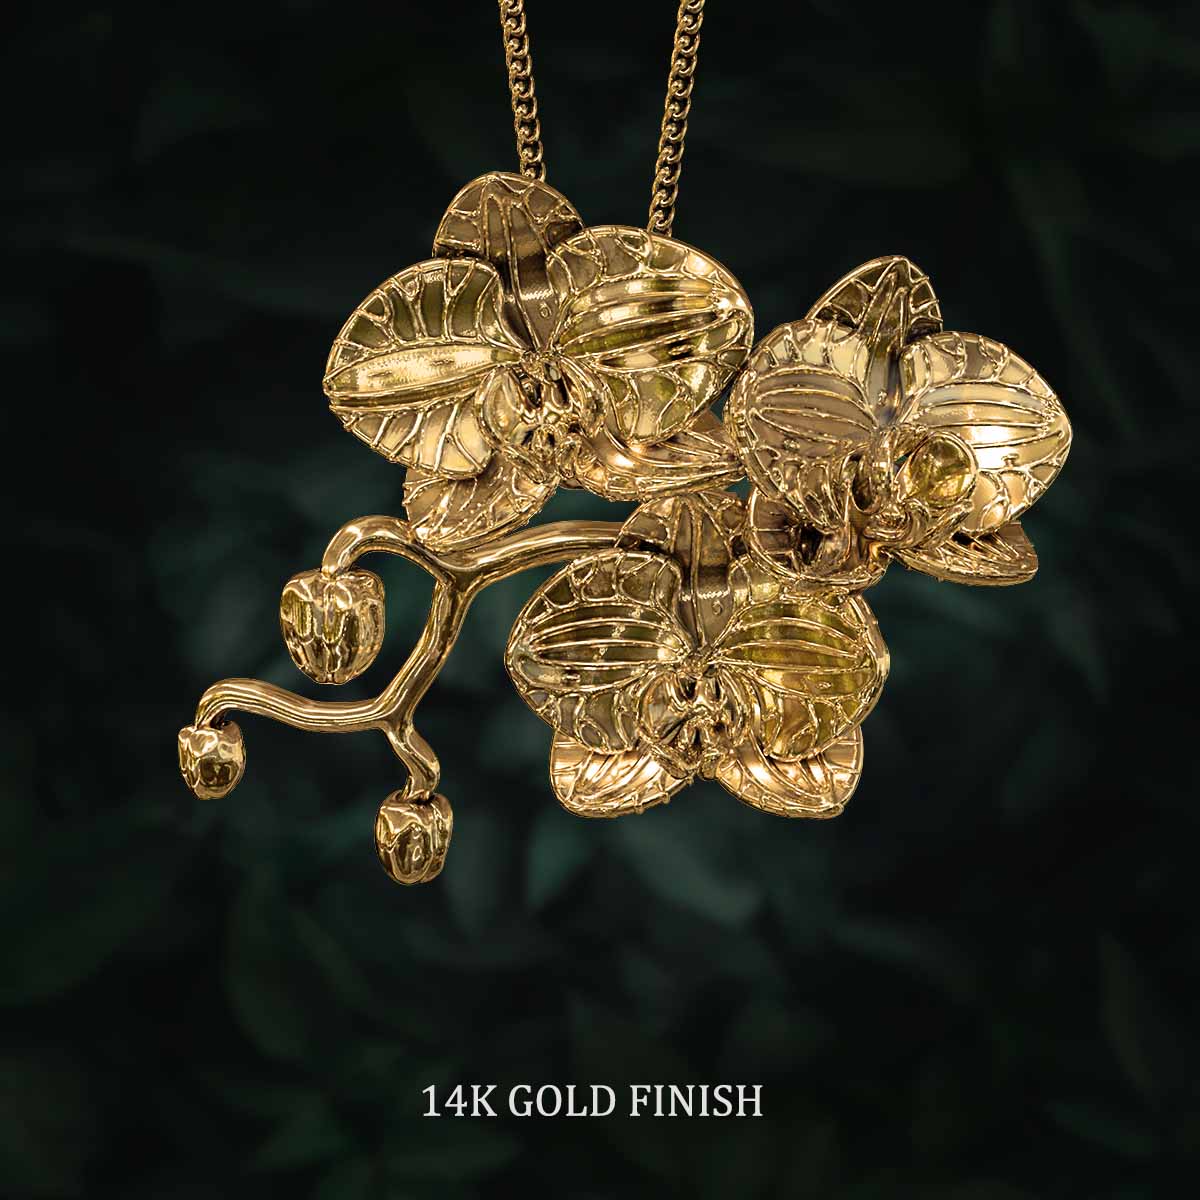     14k-Gold-Finish-Three-Orchid-Flowers-Pendant-Jewelry-For-Necklace